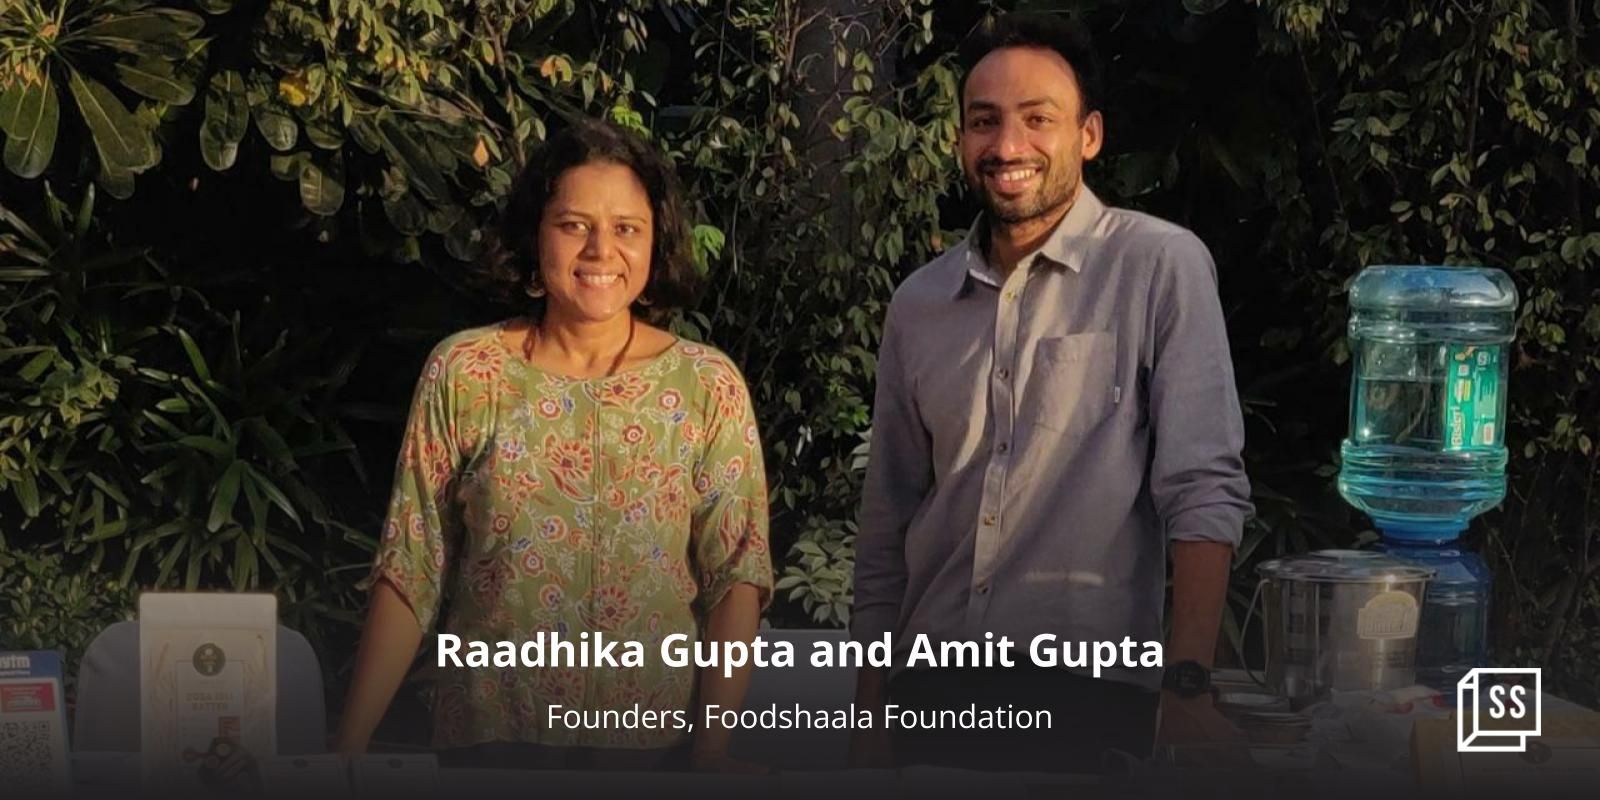 Foodshaala is bringing the concept of healthy eating to low income households